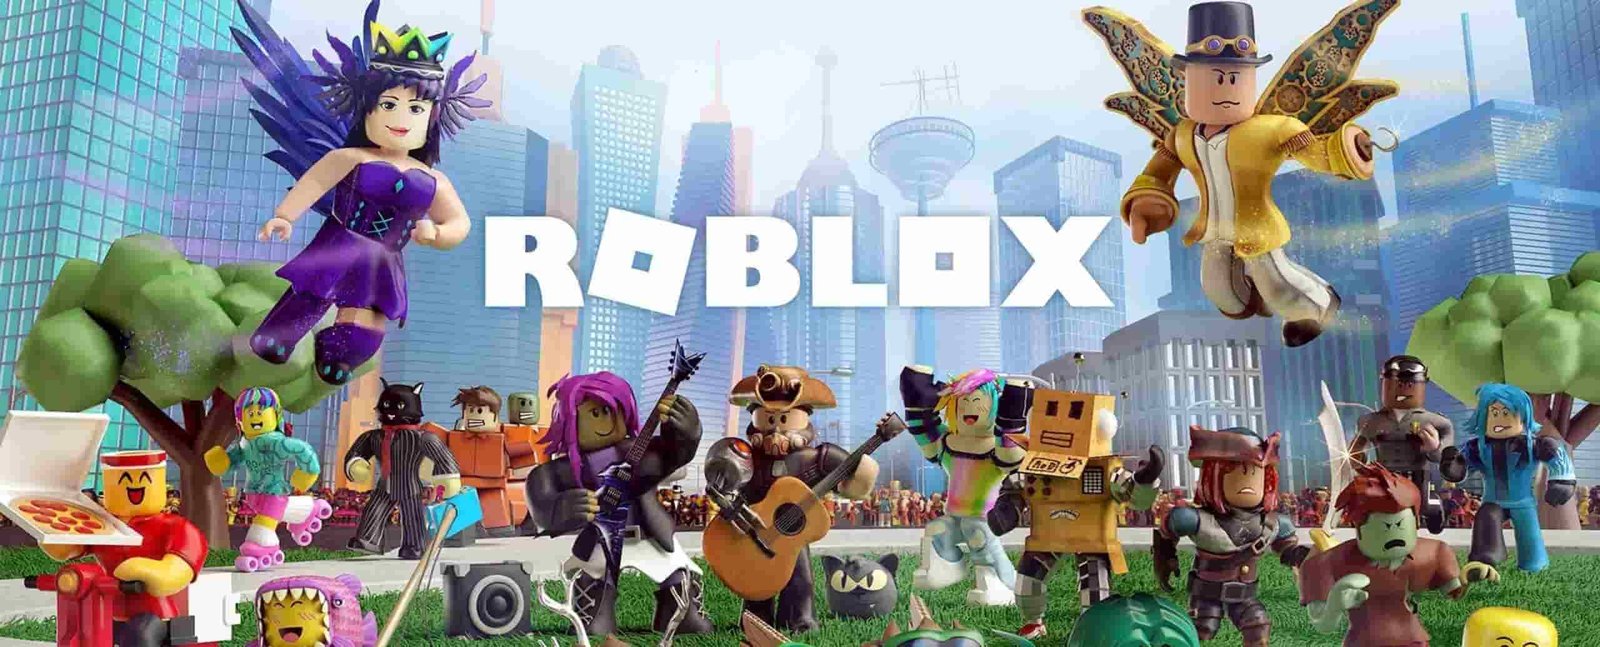 Roblox Voice Chat Feature Might Only Work For 18 Users Suggests Code Digistatement - how to voice chat on roblox